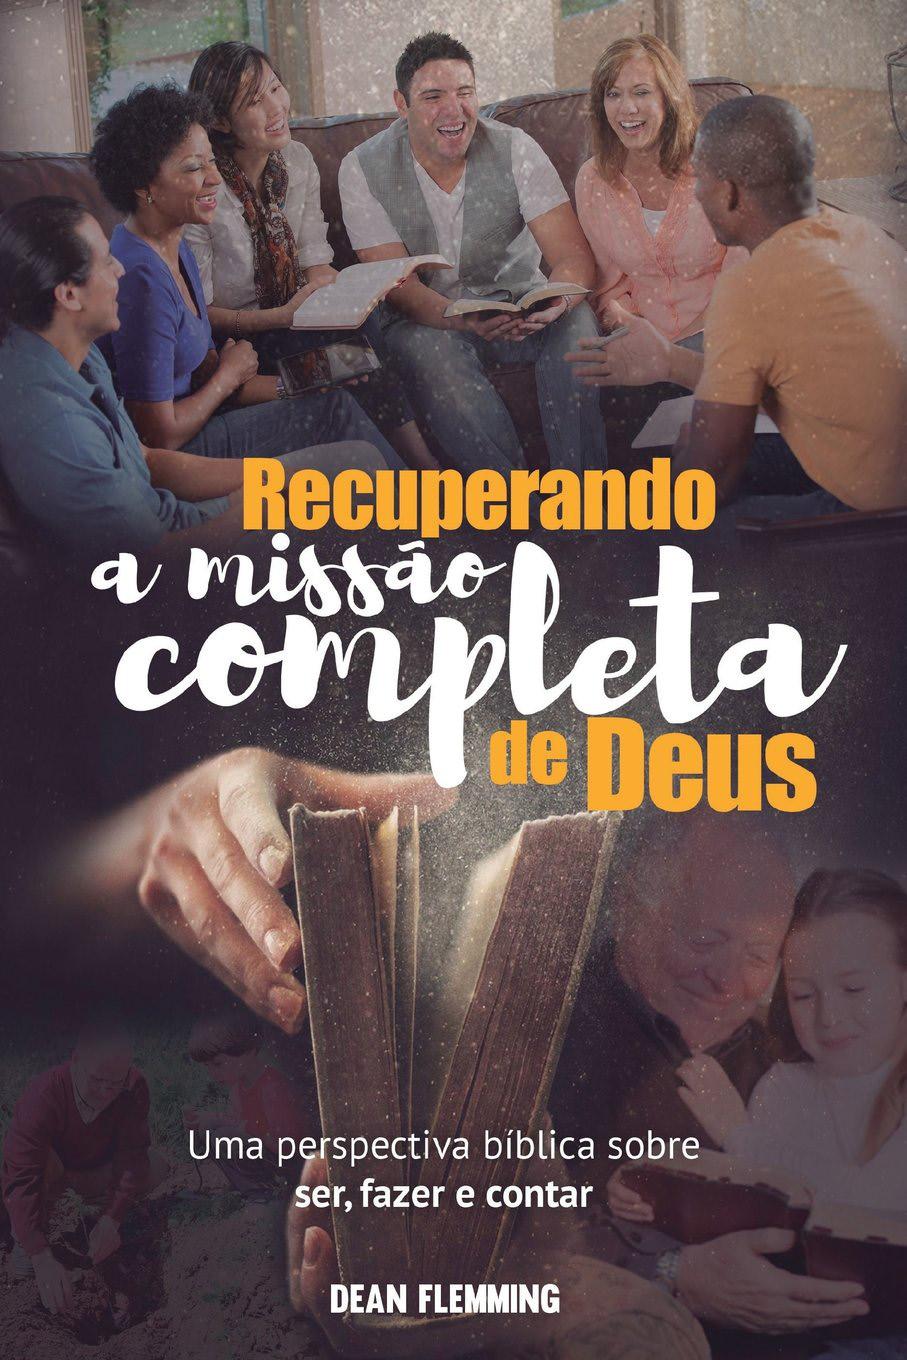 Theological education Portugal District celebrates translation of theology book on mission By Gina Grate Pottenger About 75 people gathered on May 1 in Lisbon to celebrate the publication of a